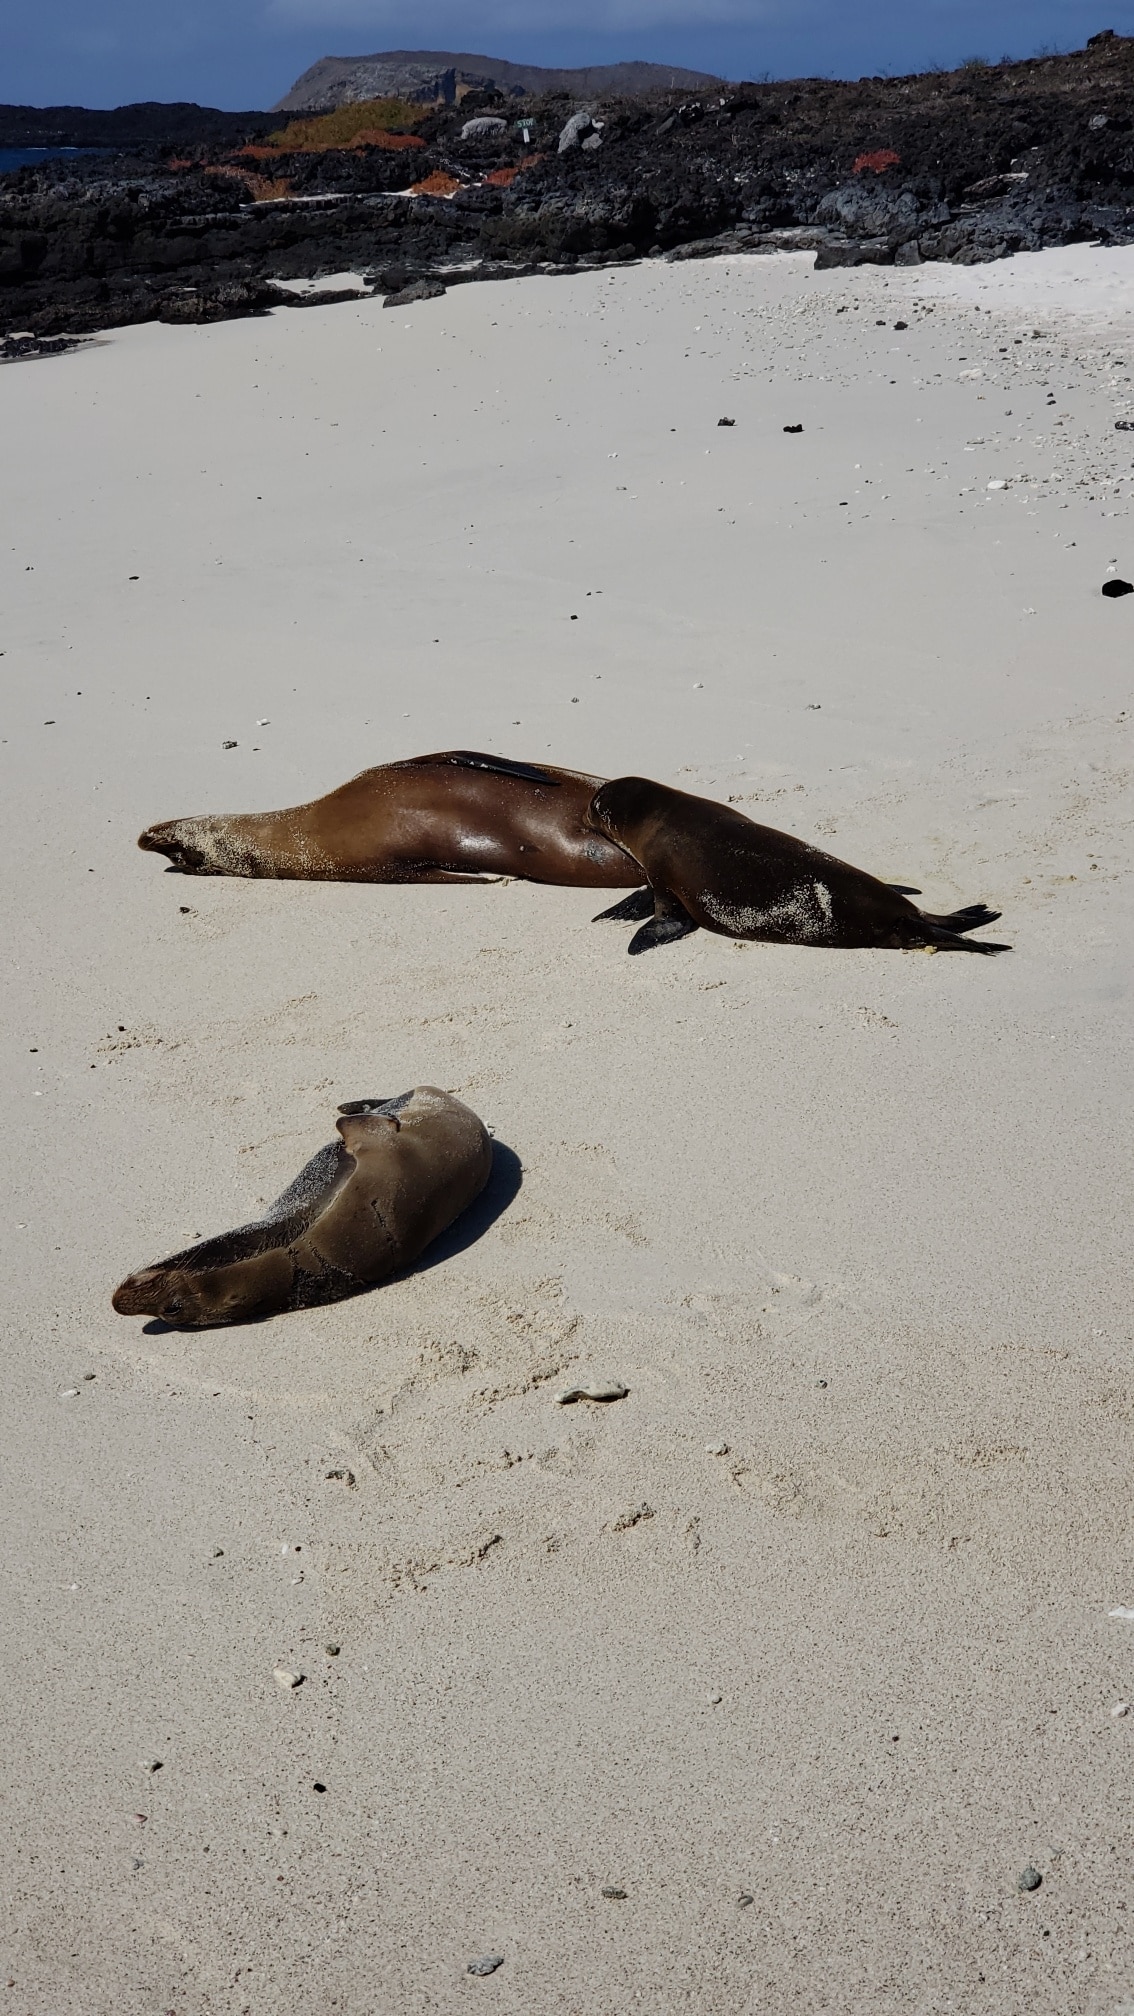 Just another lazy afternoon @ Sombrero Chino

#galapagosislands #sombrerochino